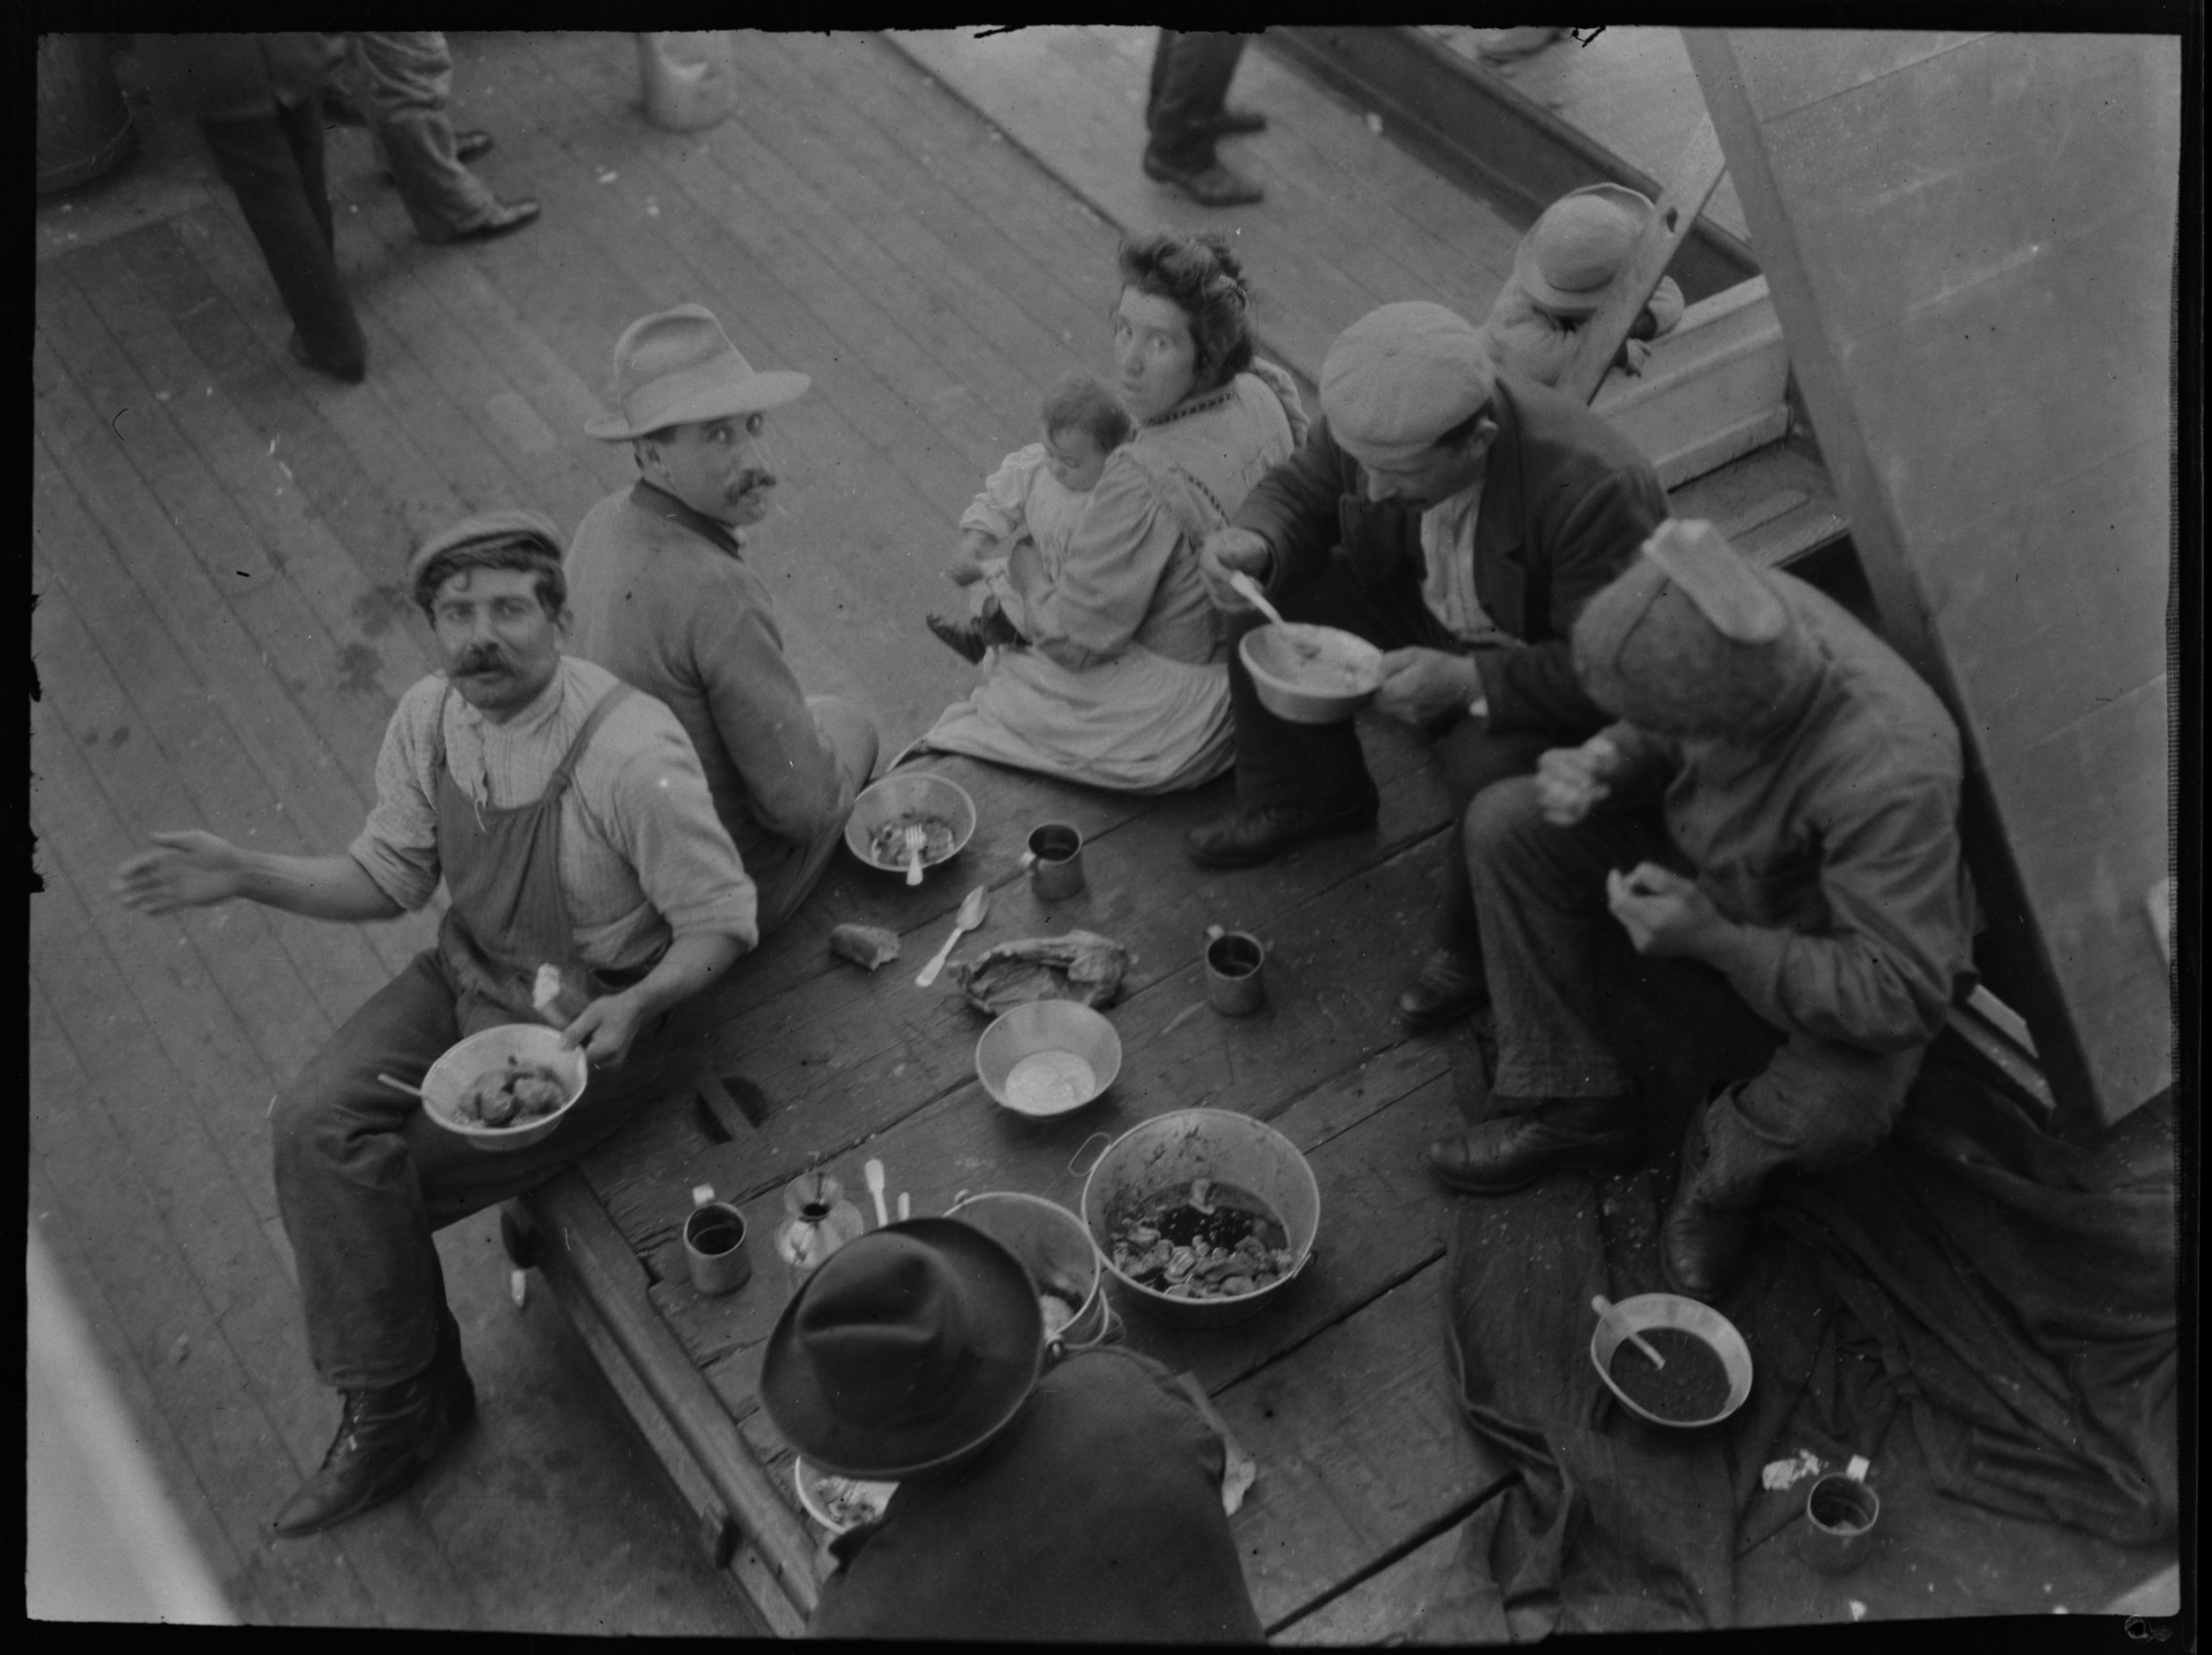  “Steerage at supper,” aboard the S.S. Finland, June 14, 1909